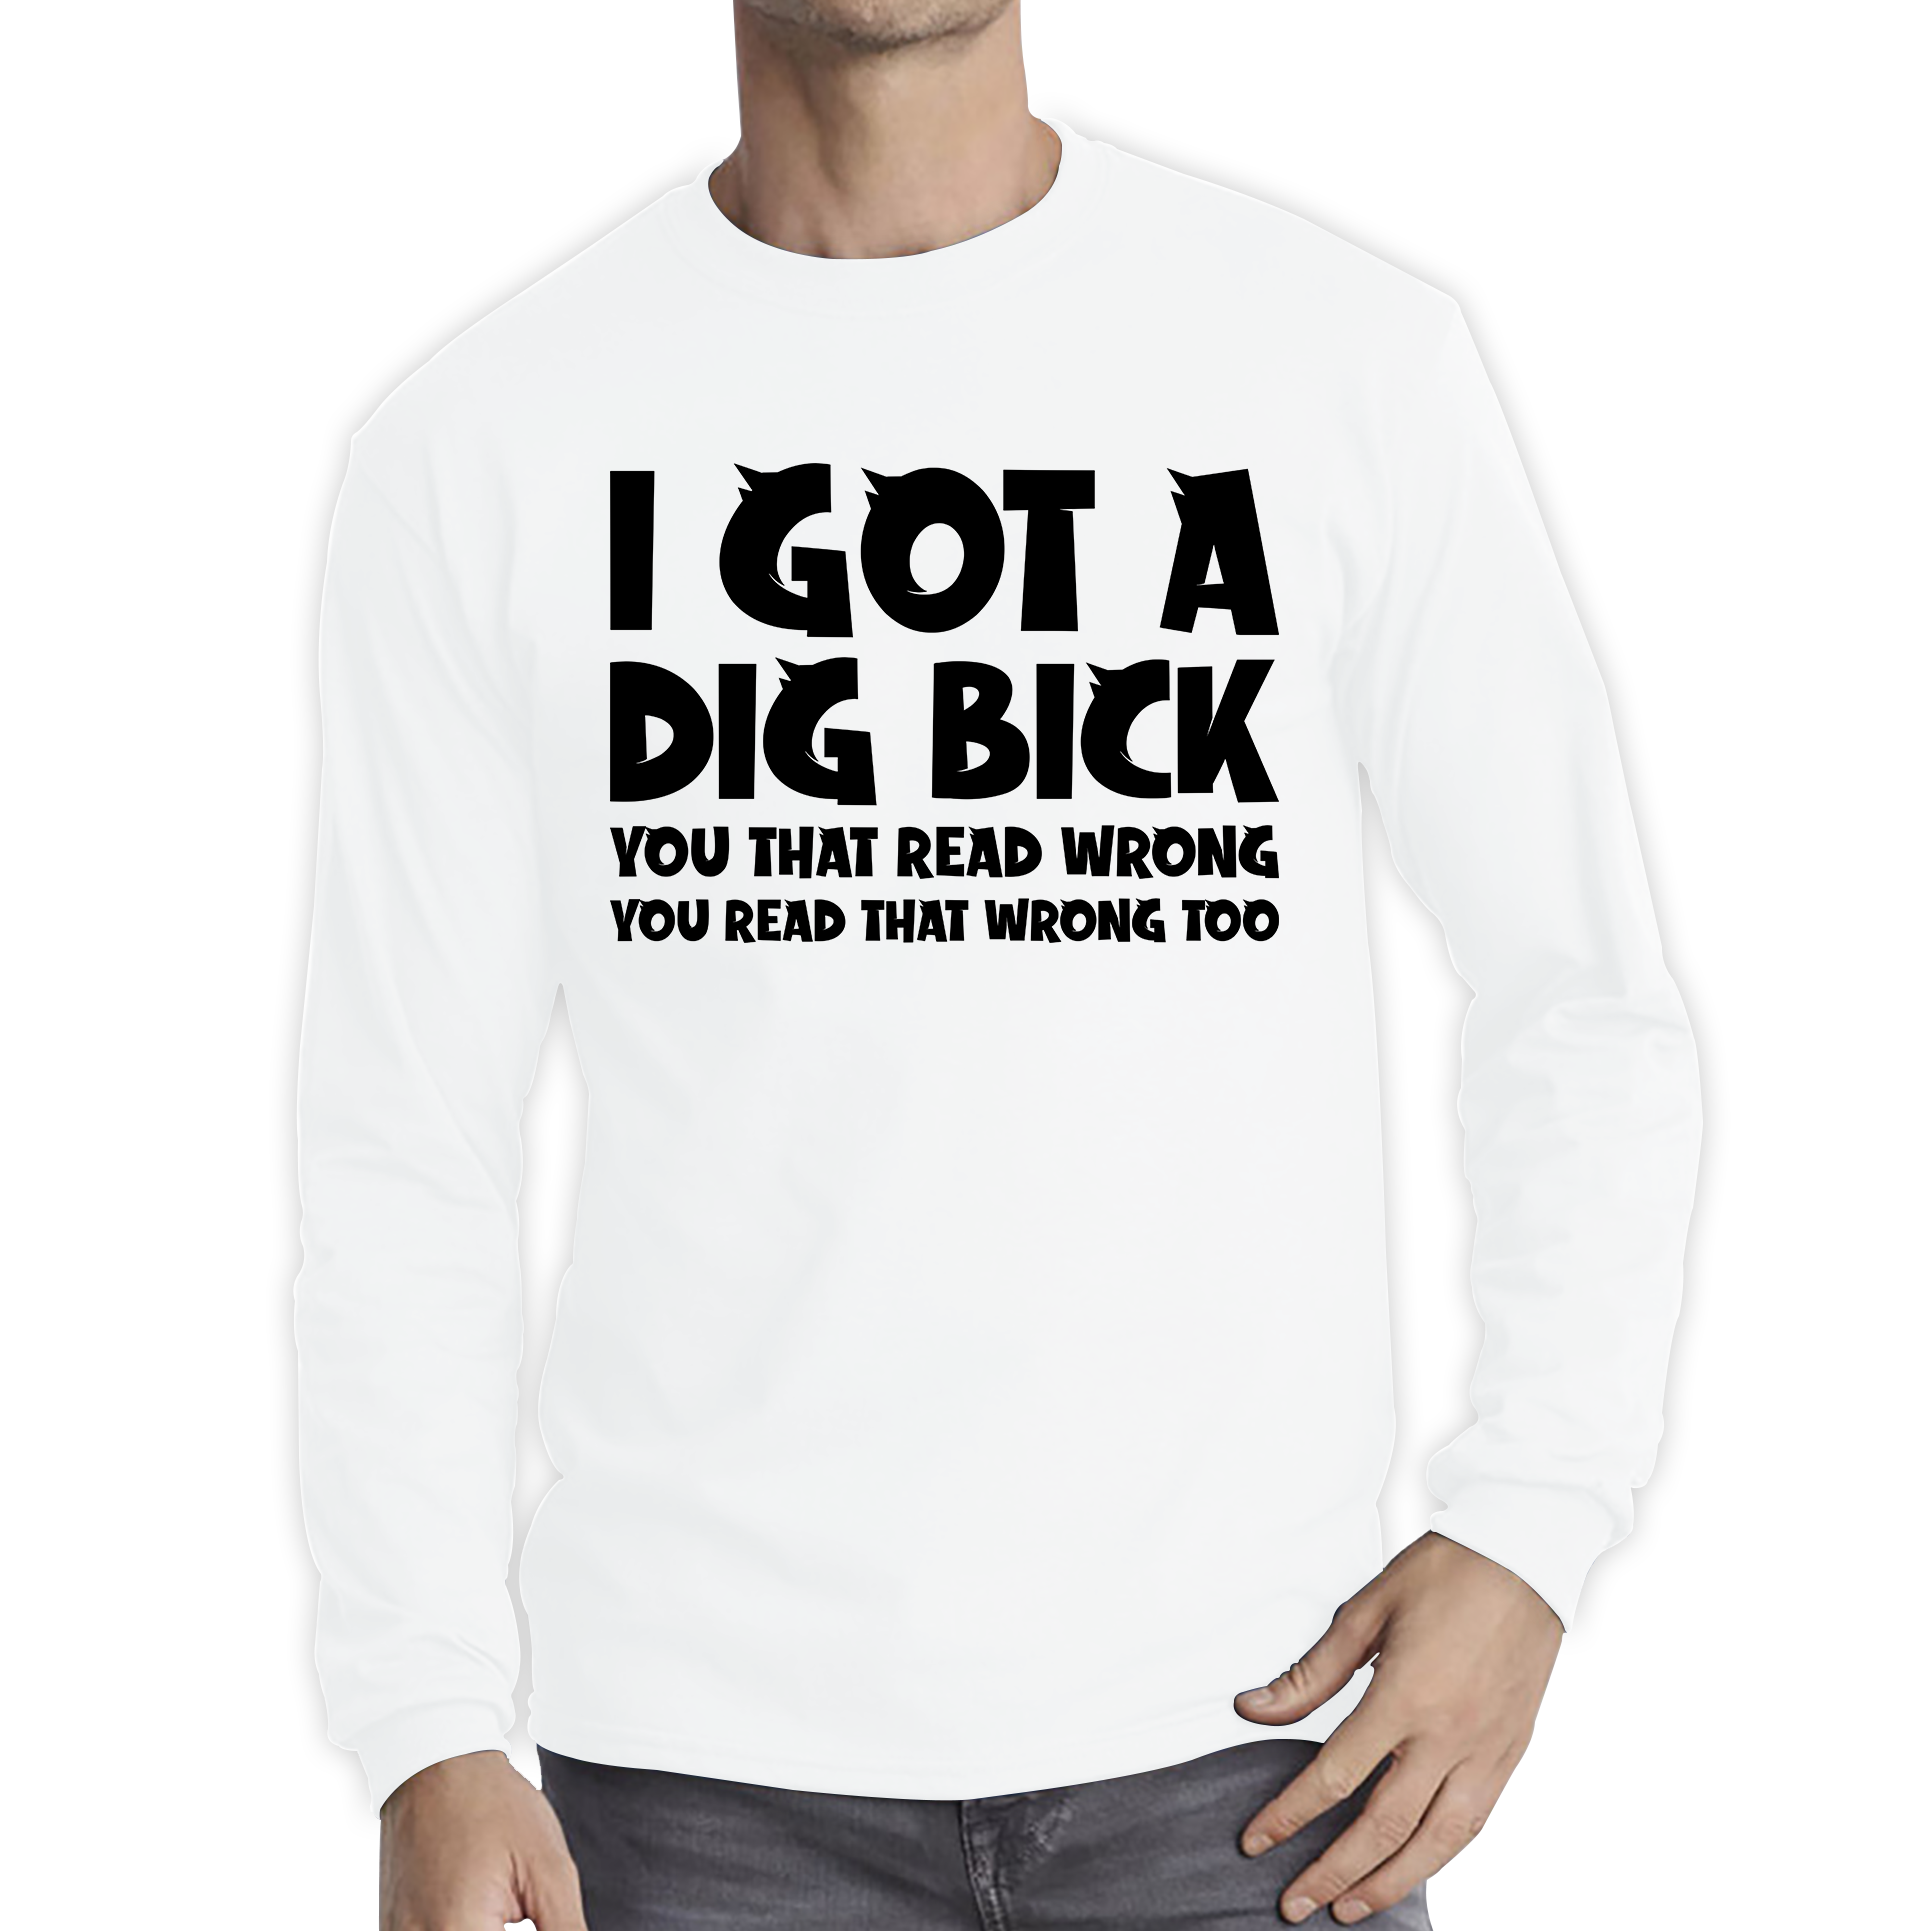 I Got A Dig Bick You That Read Wrong You Read That Wrong Too Funny Novelty Sarcastic Humour Long Sleeve T Shirt